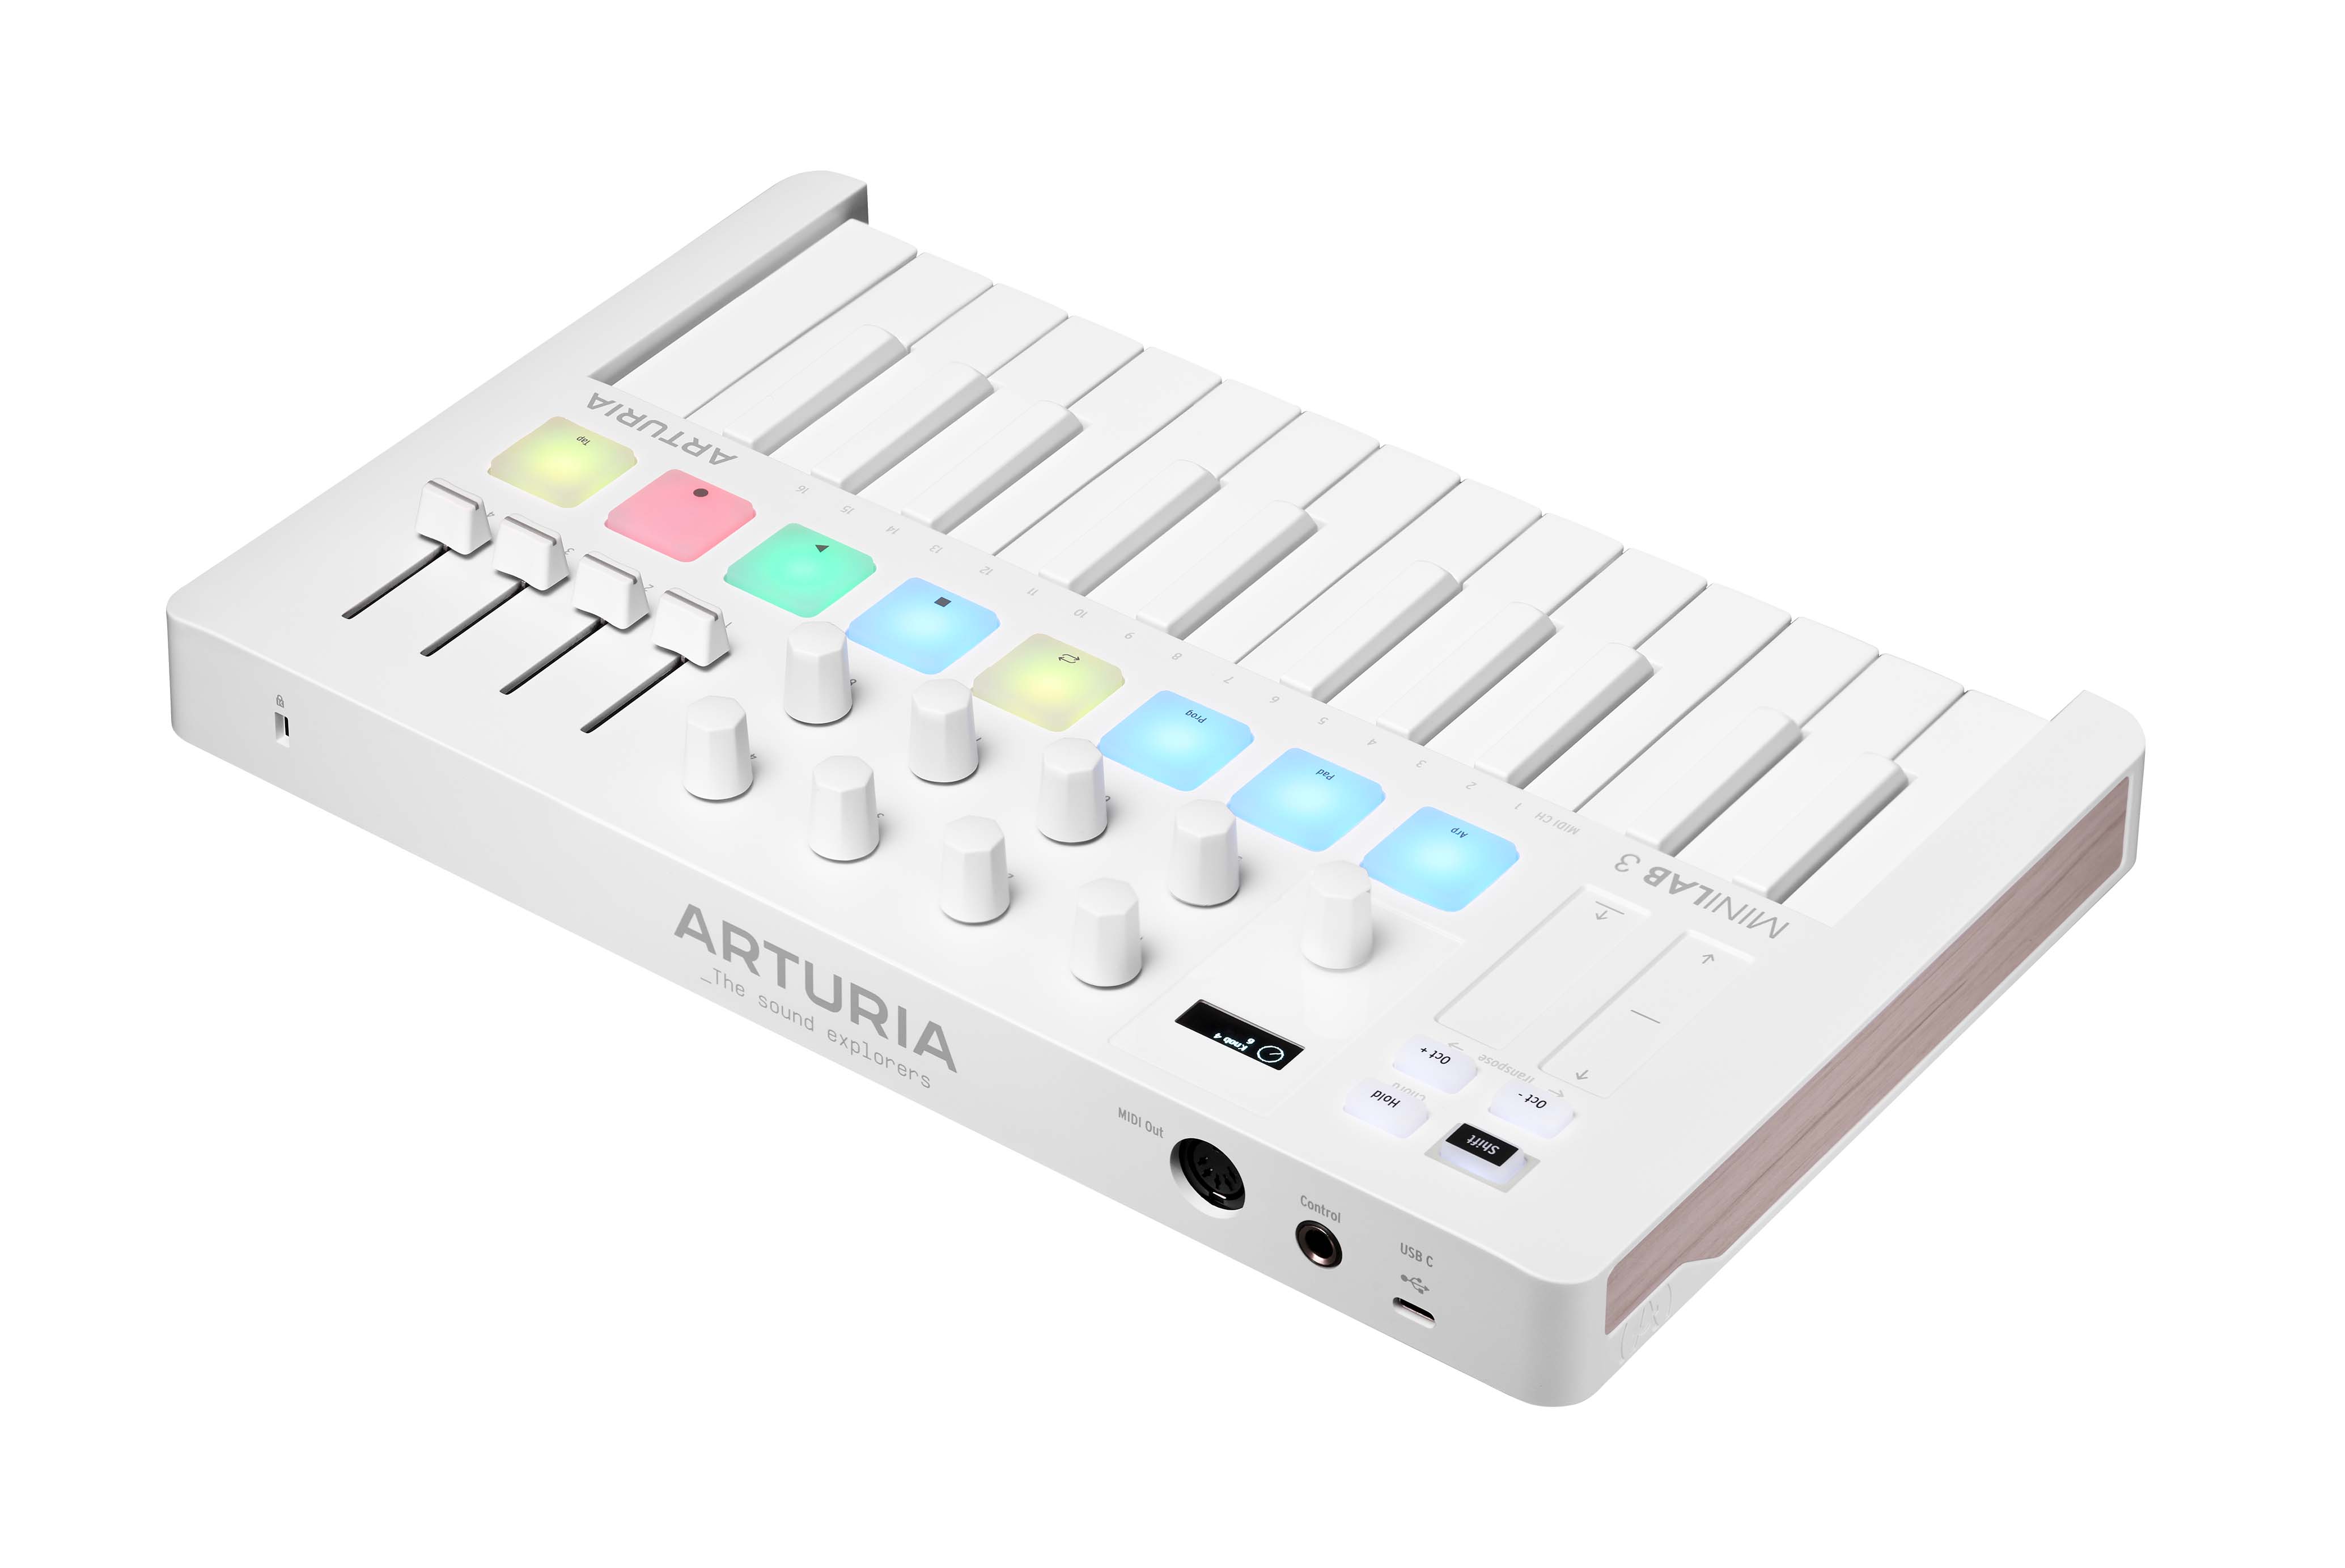  Arturia - MiniLab 3 - Universal MIDI controller for music  production with all-in-one software package - 25 keys, 8 multicolor pads -  black : Musical Instruments